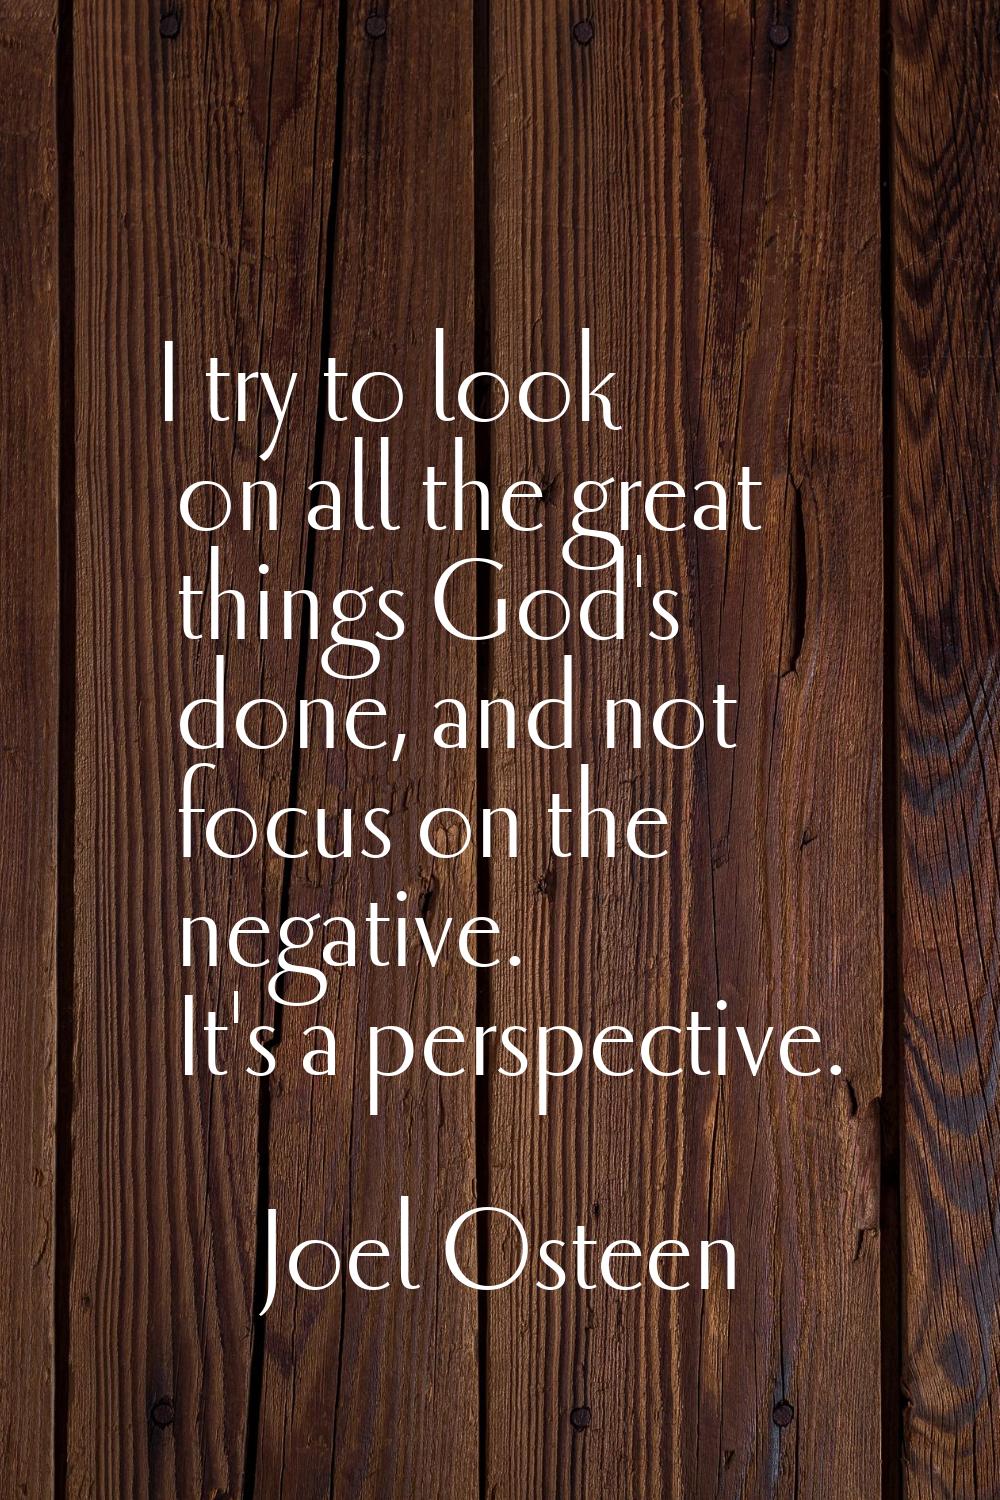 I try to look on all the great things God's done, and not focus on the negative. It's a perspective